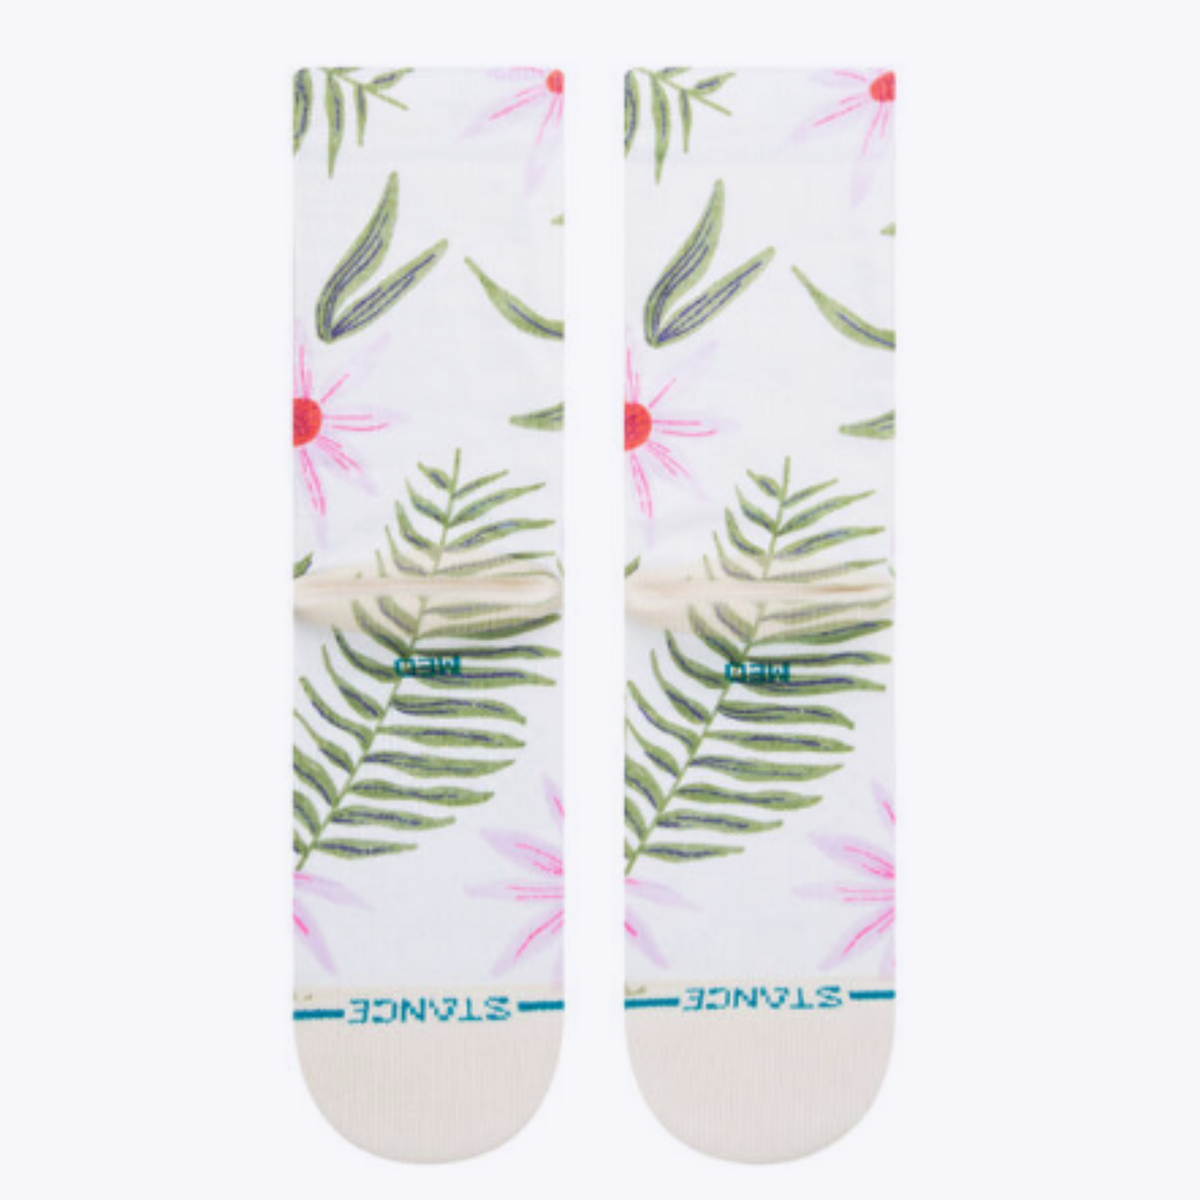 Bottom of Stance Flaunt women&#39;s crew sock featuring white sock with pink flowers and green leaves and stems.